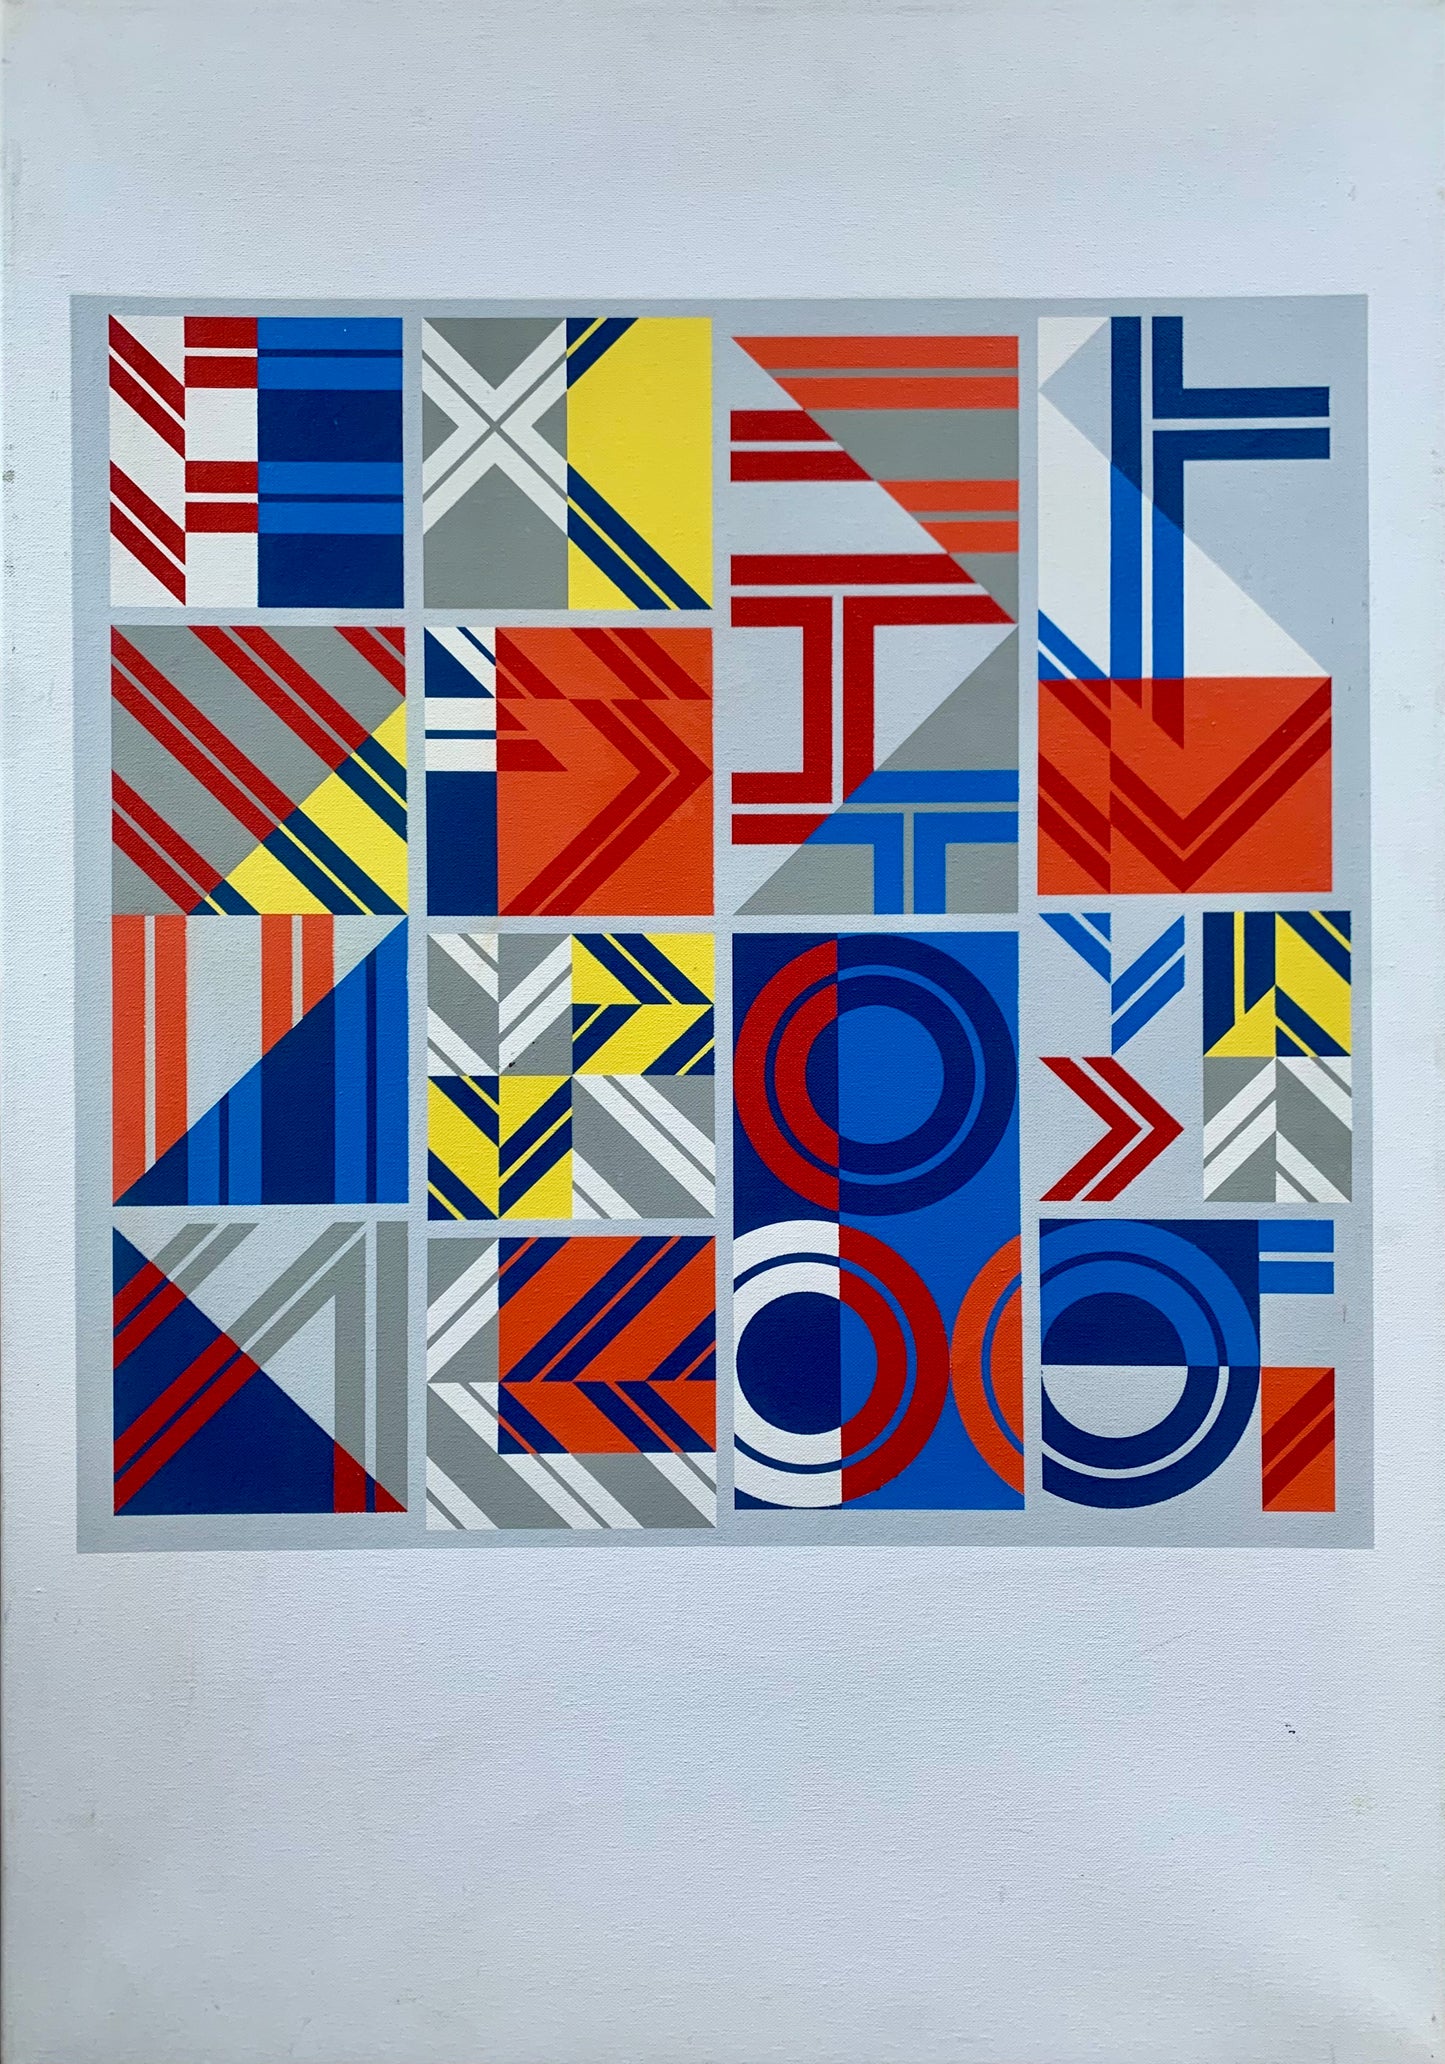 Ole Schwalbe. Composition, 1987